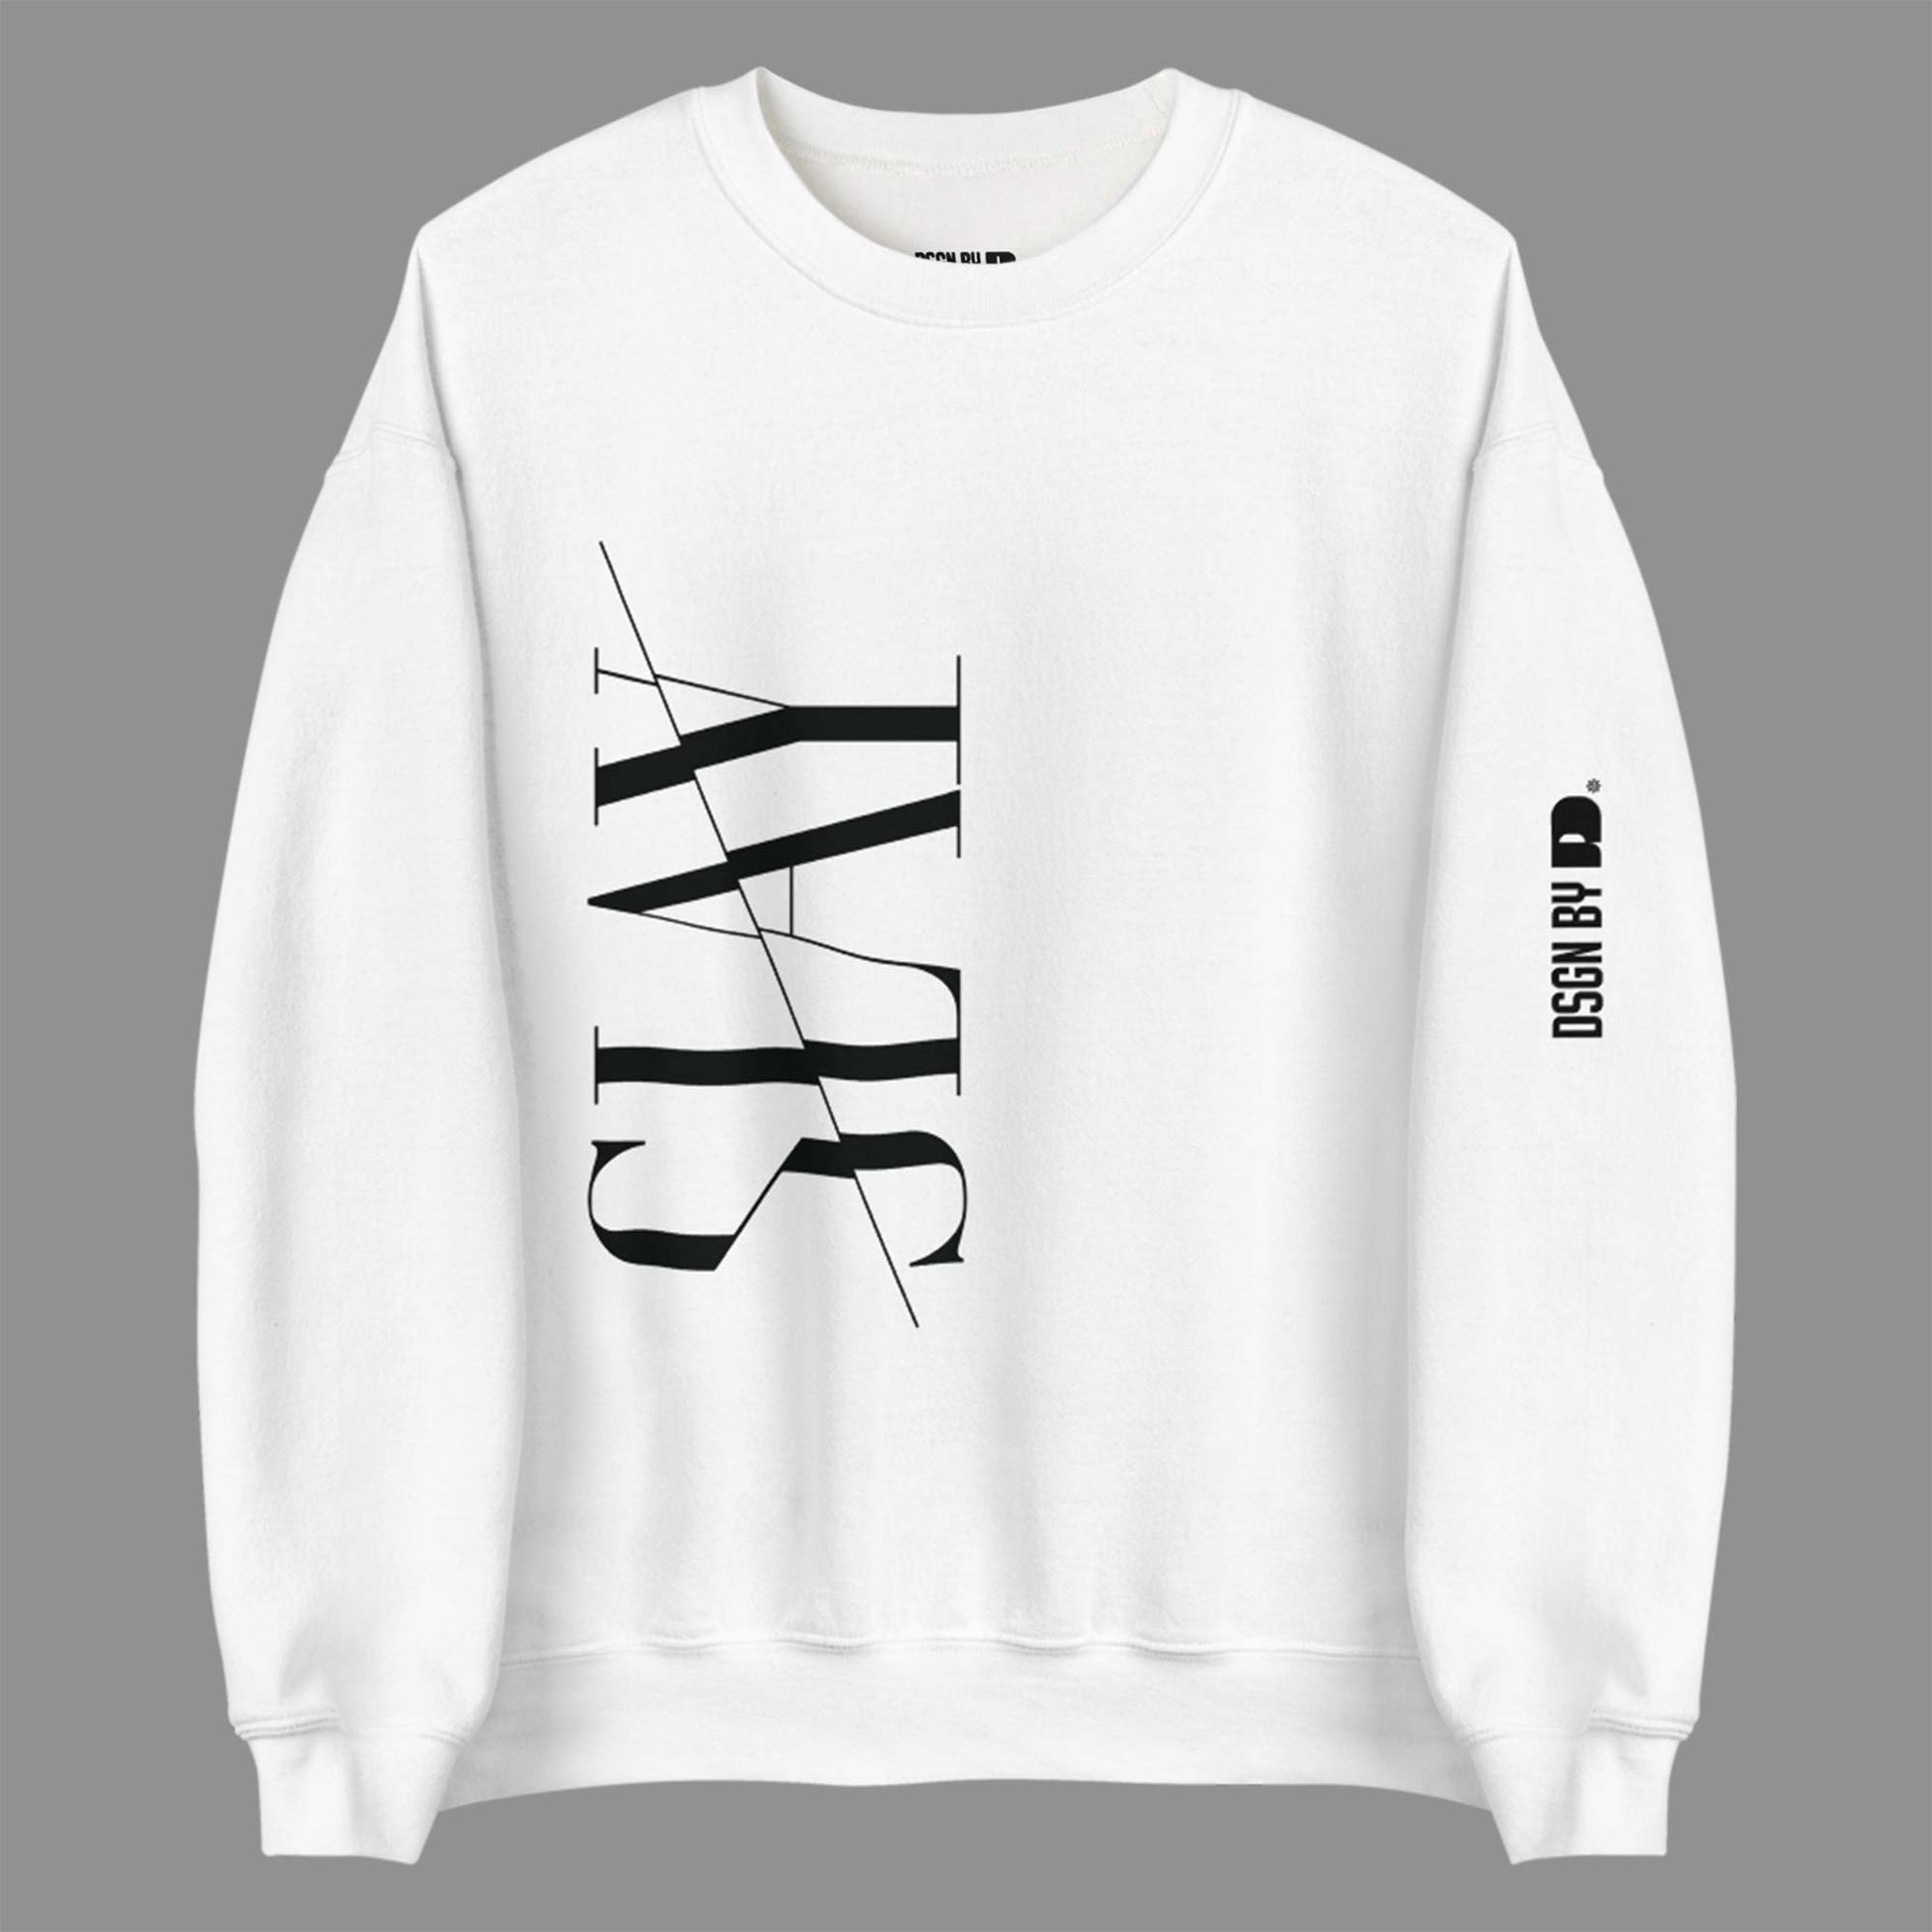 A white unisex crew neck sweatshirt with the work SLAY printed on the front.